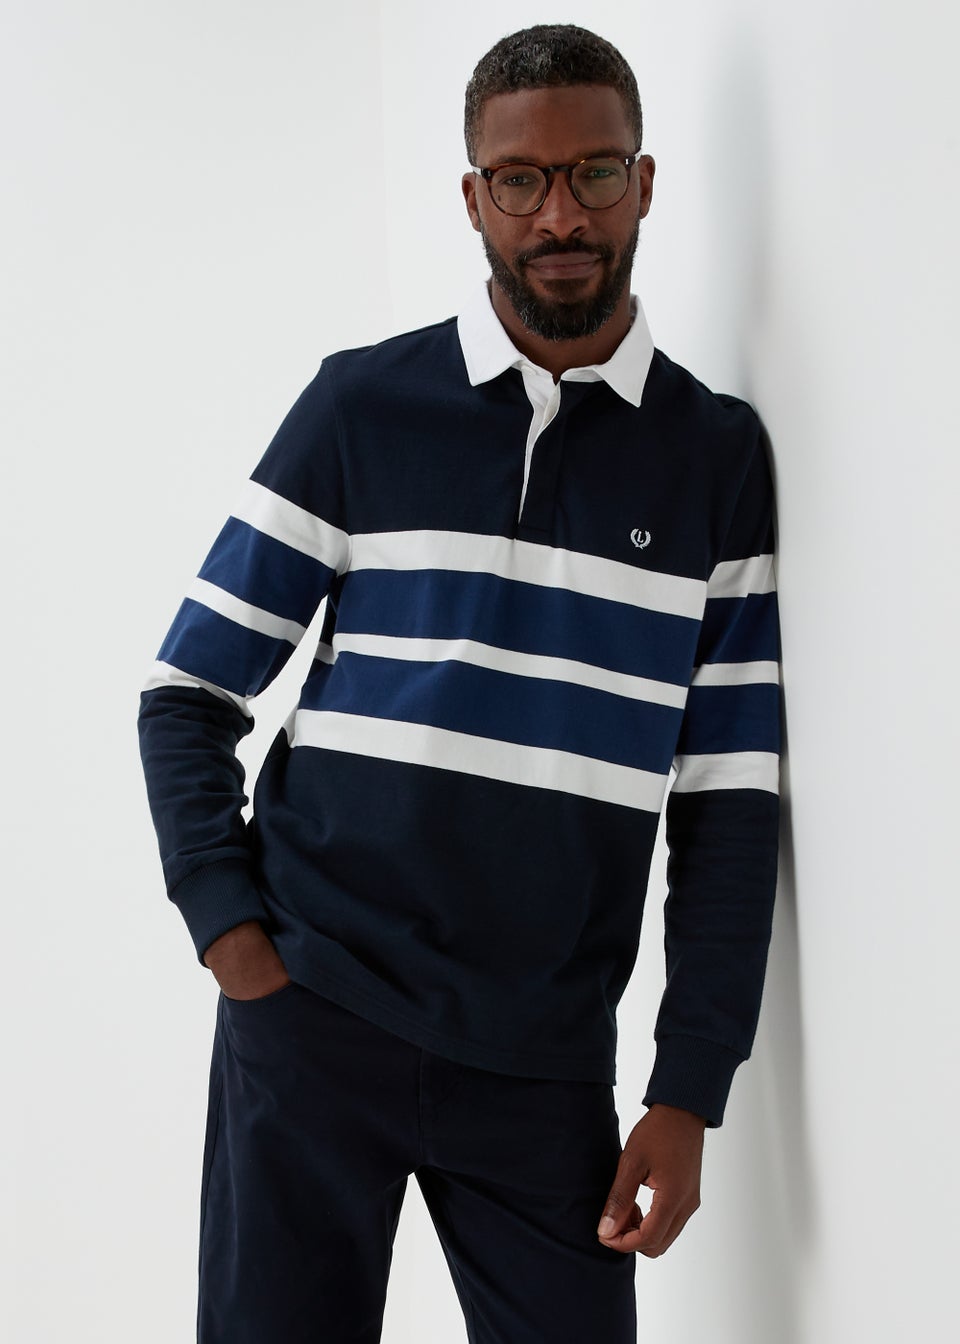 Lincoln Navy Block Rugby Polo Shirt